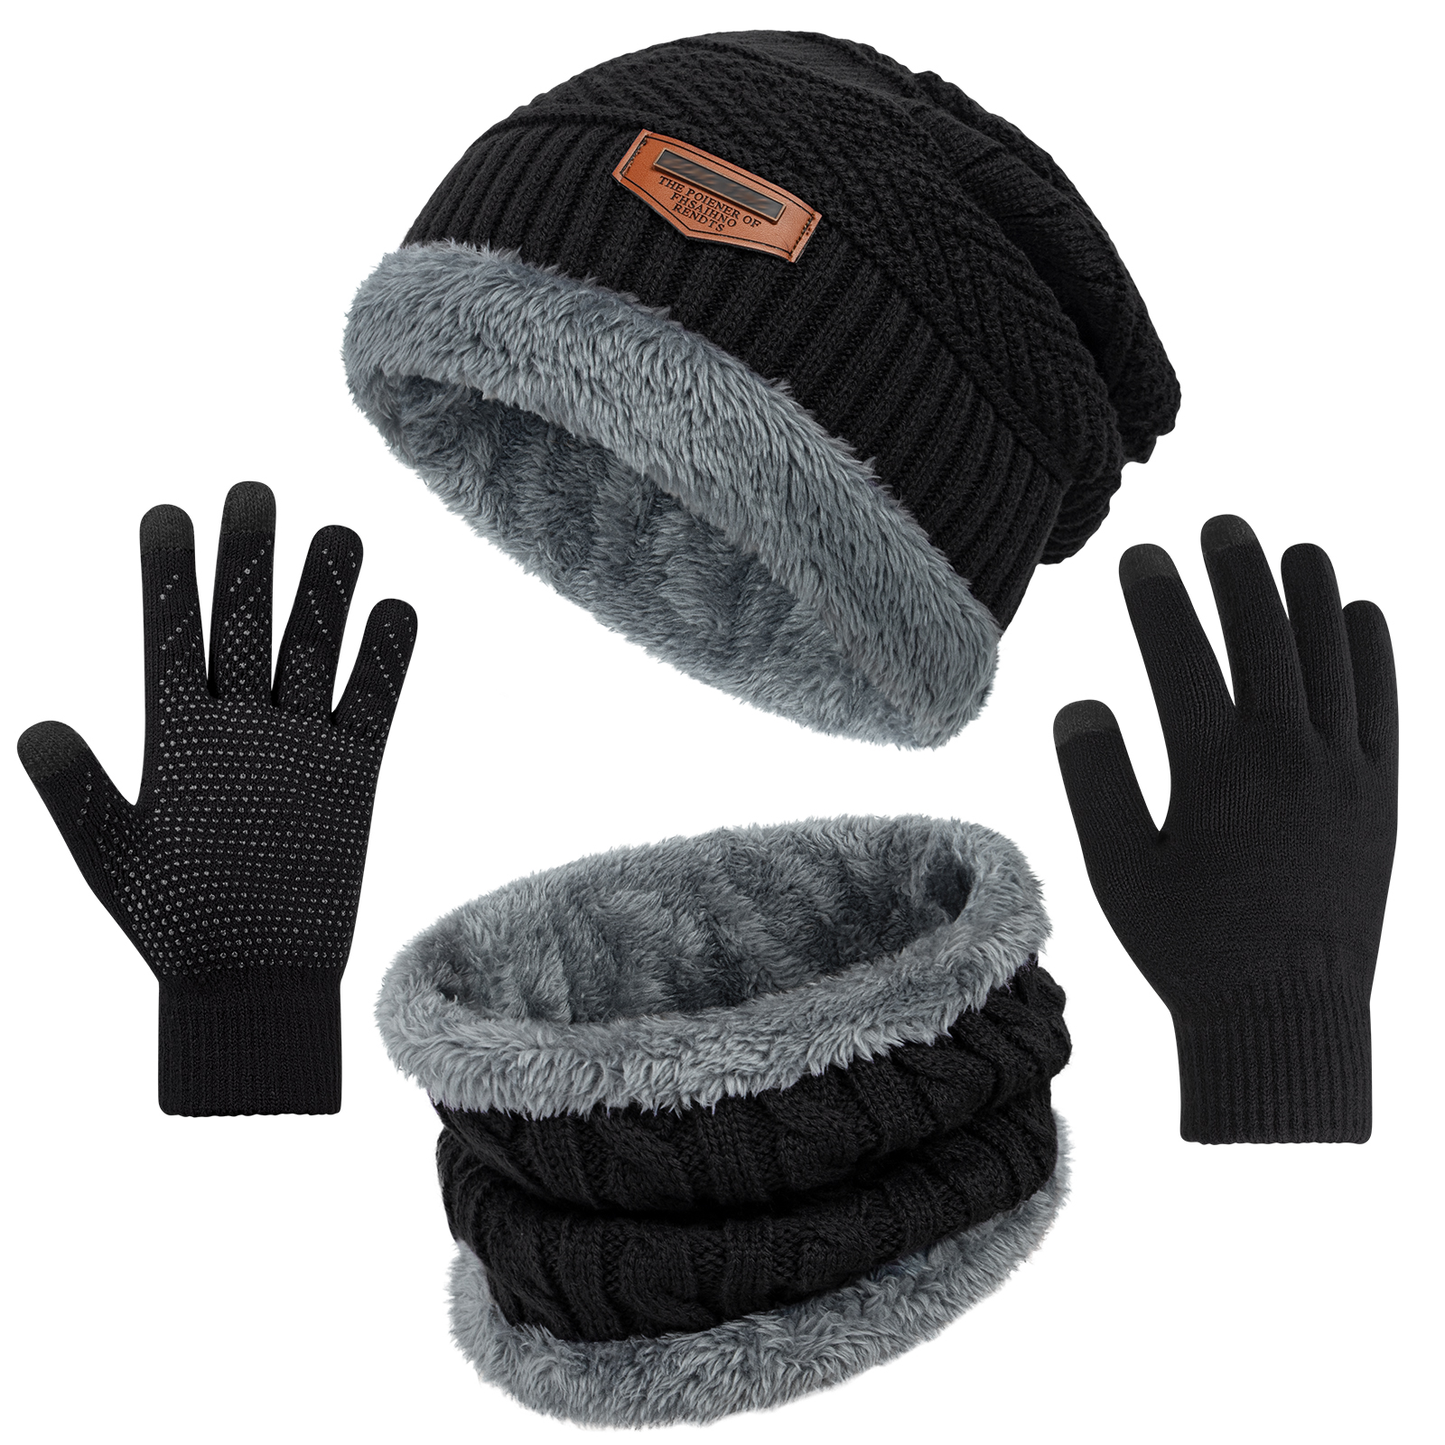 Loritta 3 Pieces Winter Beanie Hat Scarf and Touch Screen Gloves Set Warm Knit Skull Cap Gifts for Men and Women